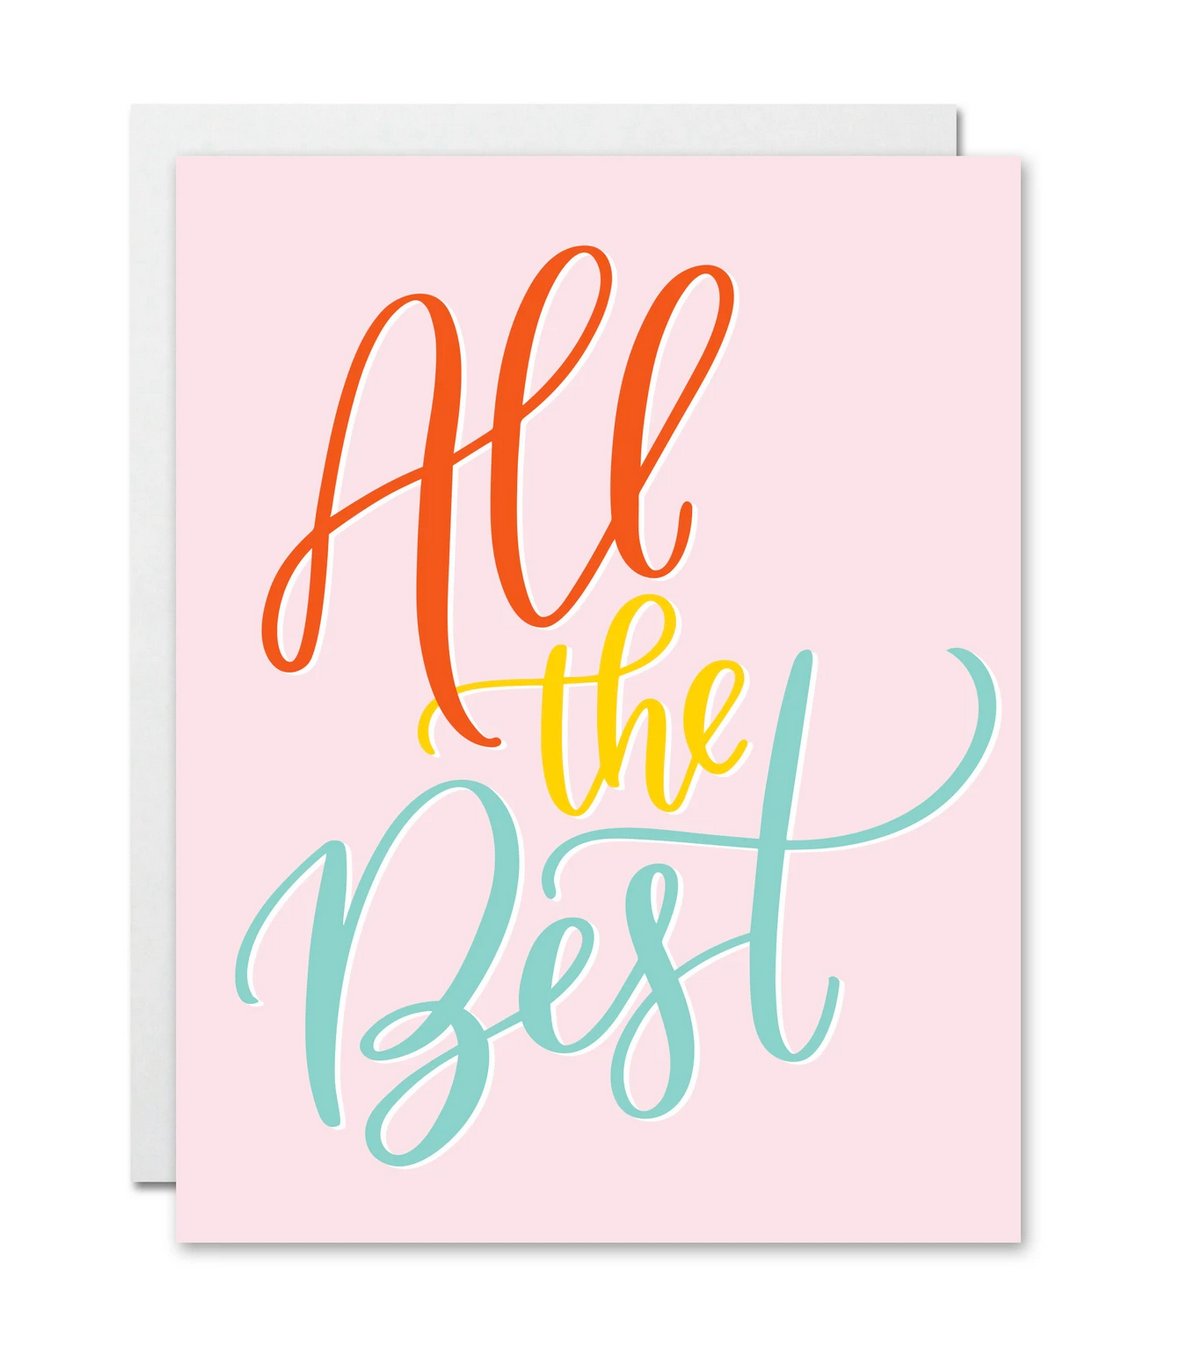 "All the Best" Card